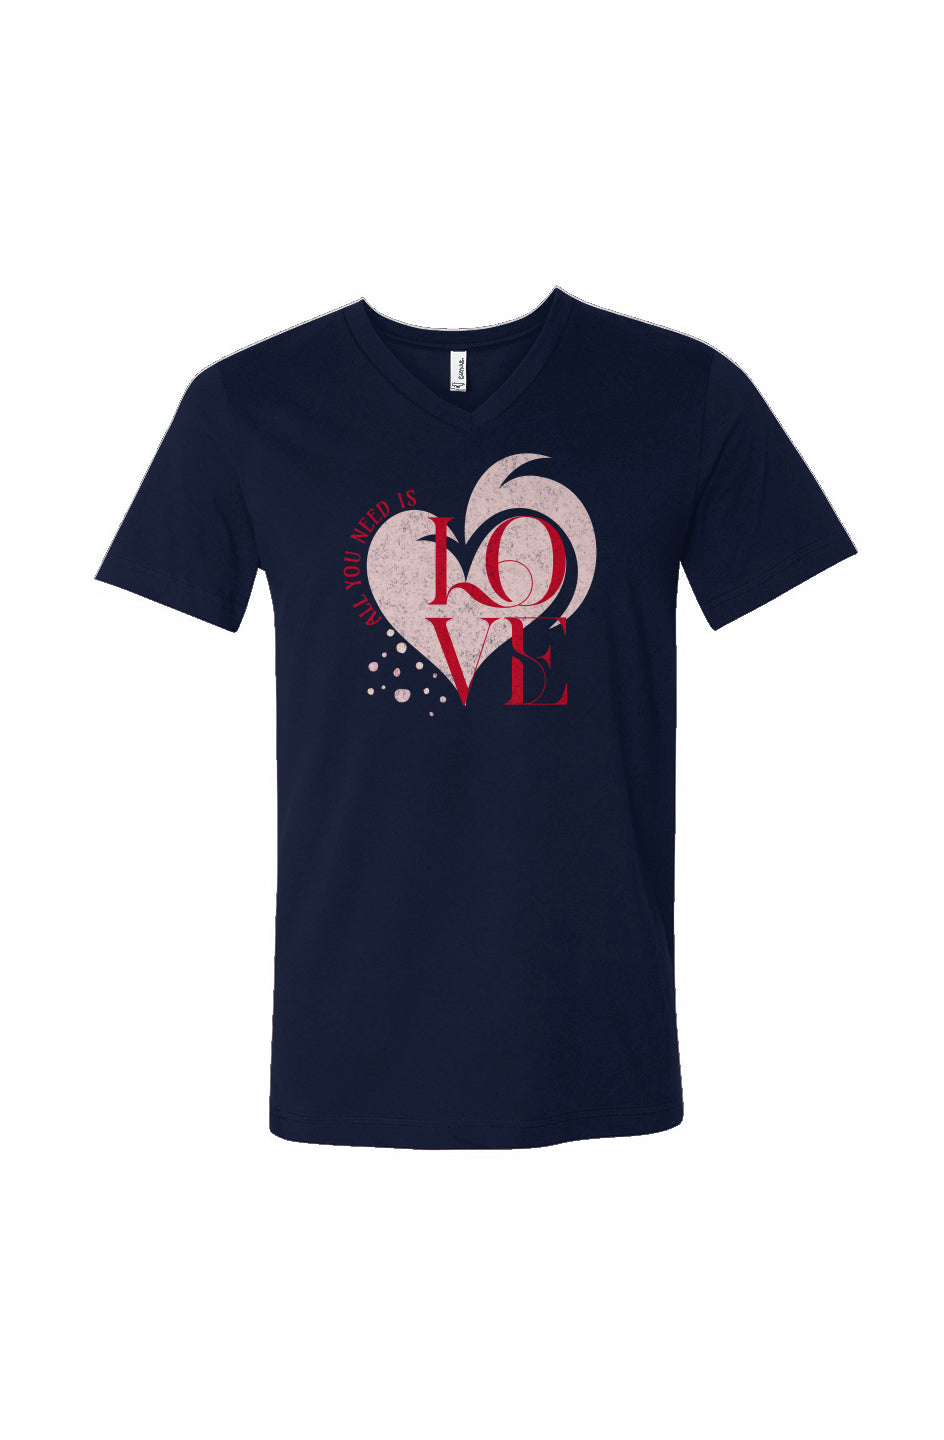 "All you need is Love" V-Neck